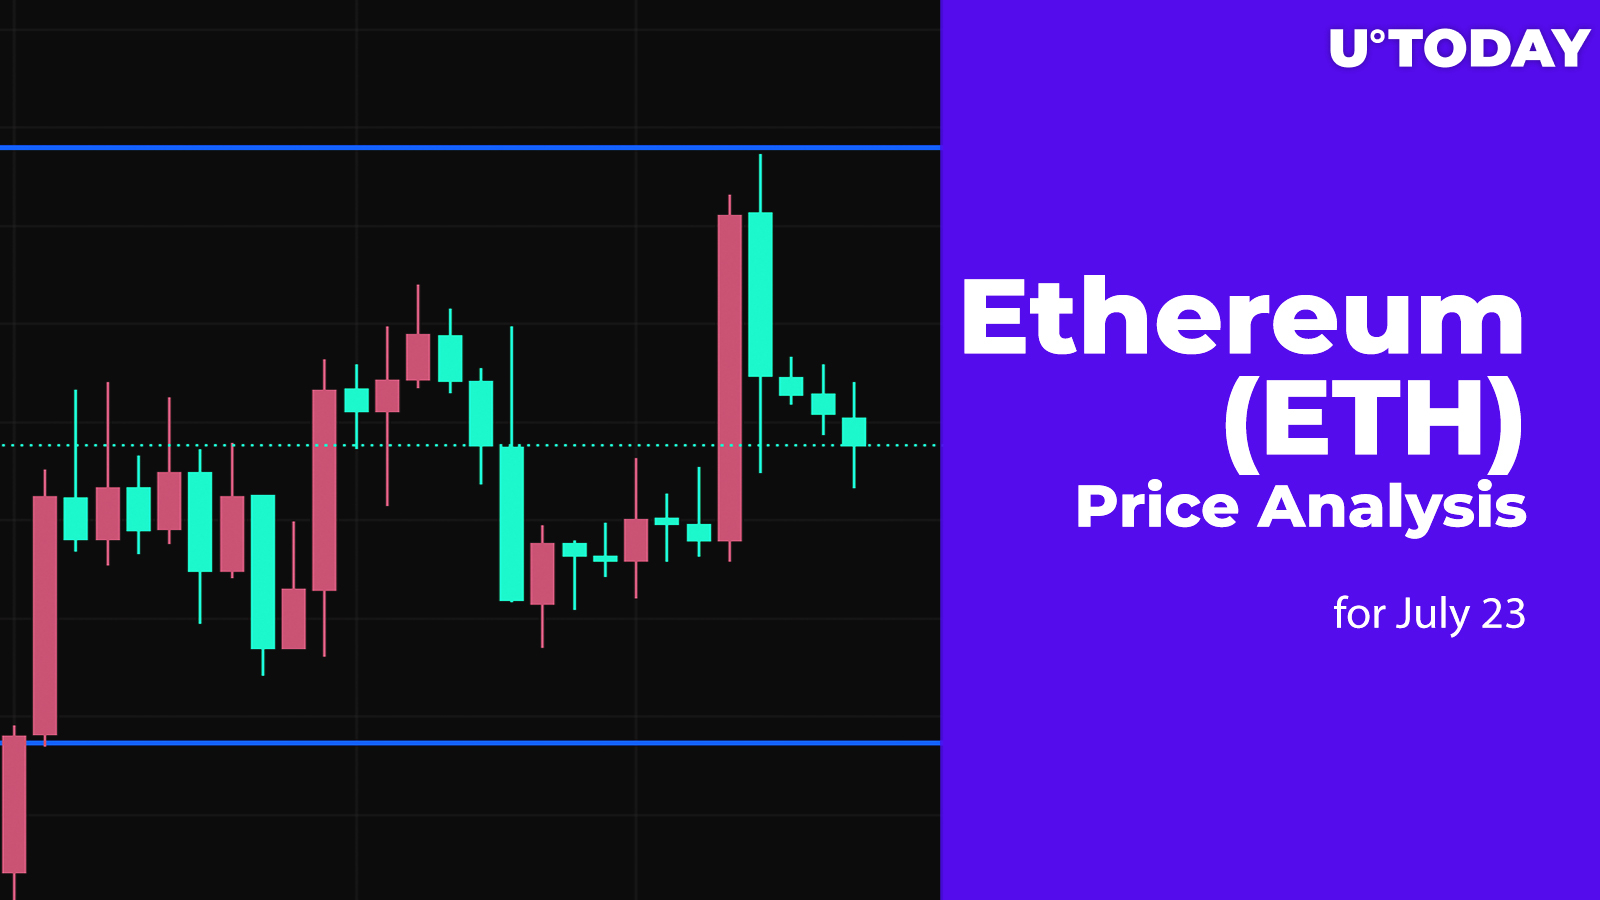 Ethereum (ETH) Price Analysis for July 23